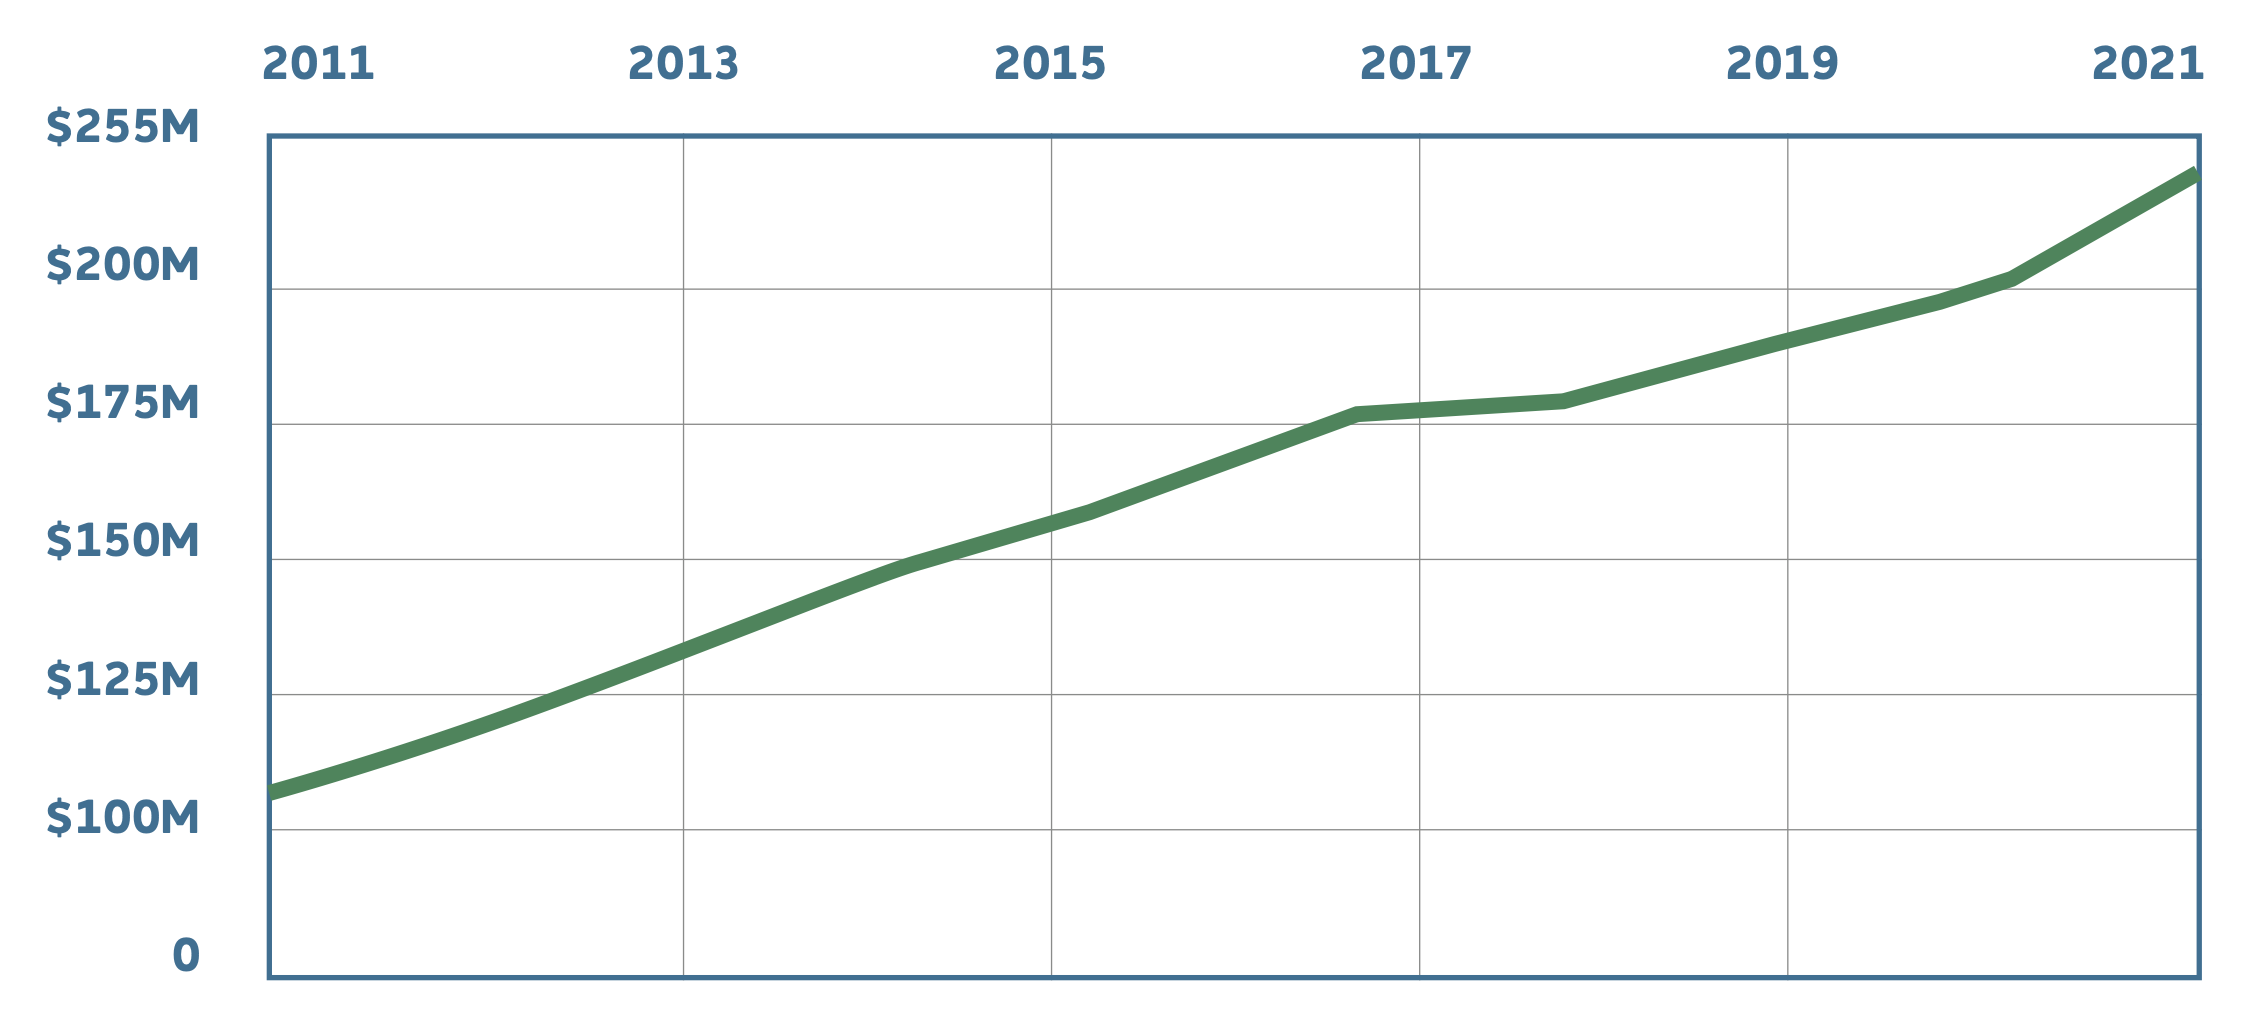 Graph from 2011 to 2021 Displaying Financial Growth of $100 Million to almost $225 Million